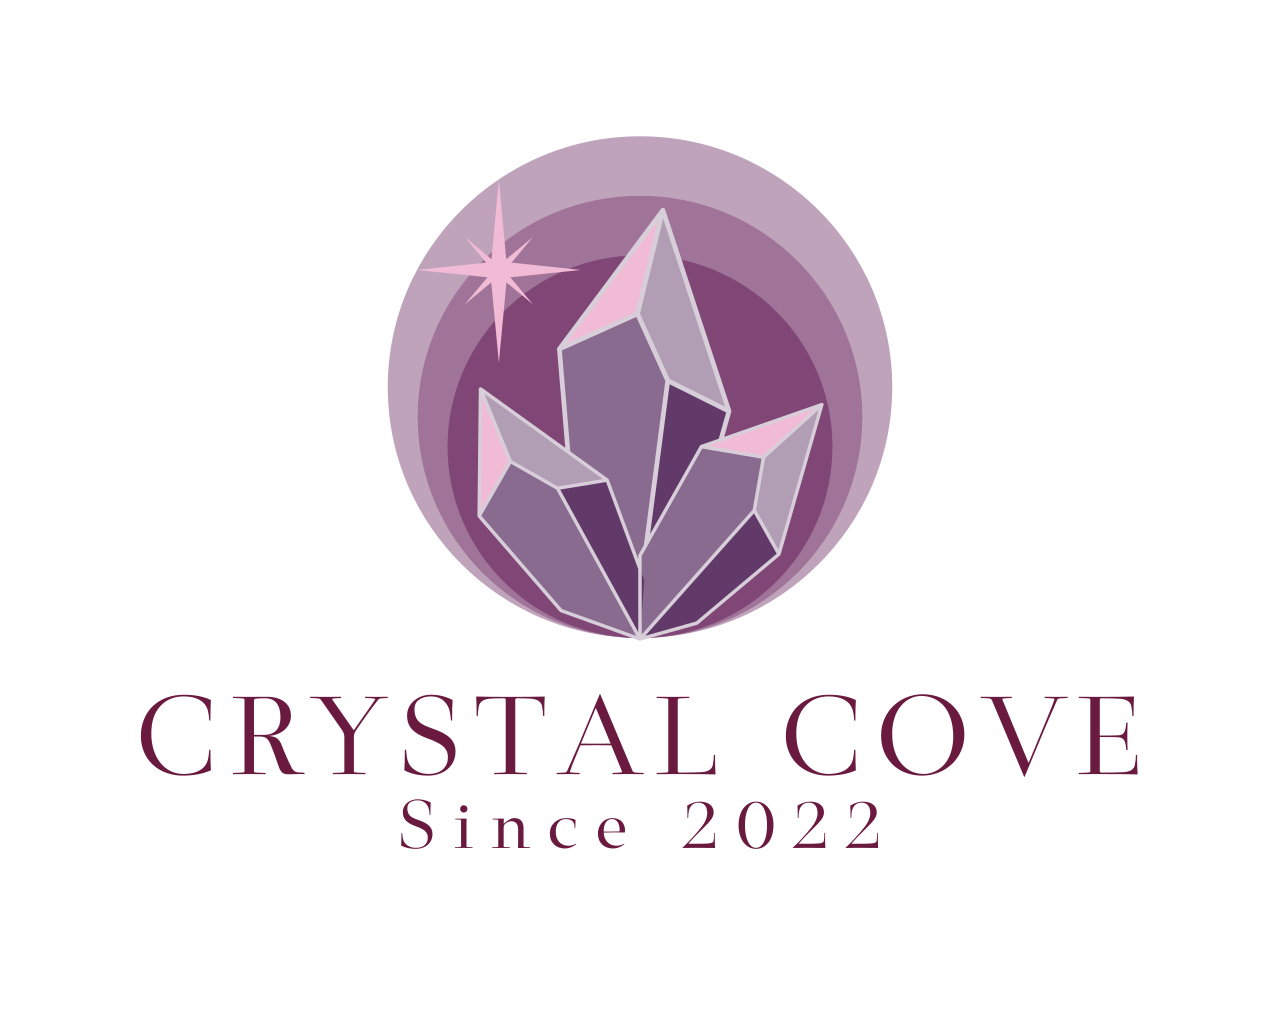 The Crystal Cove